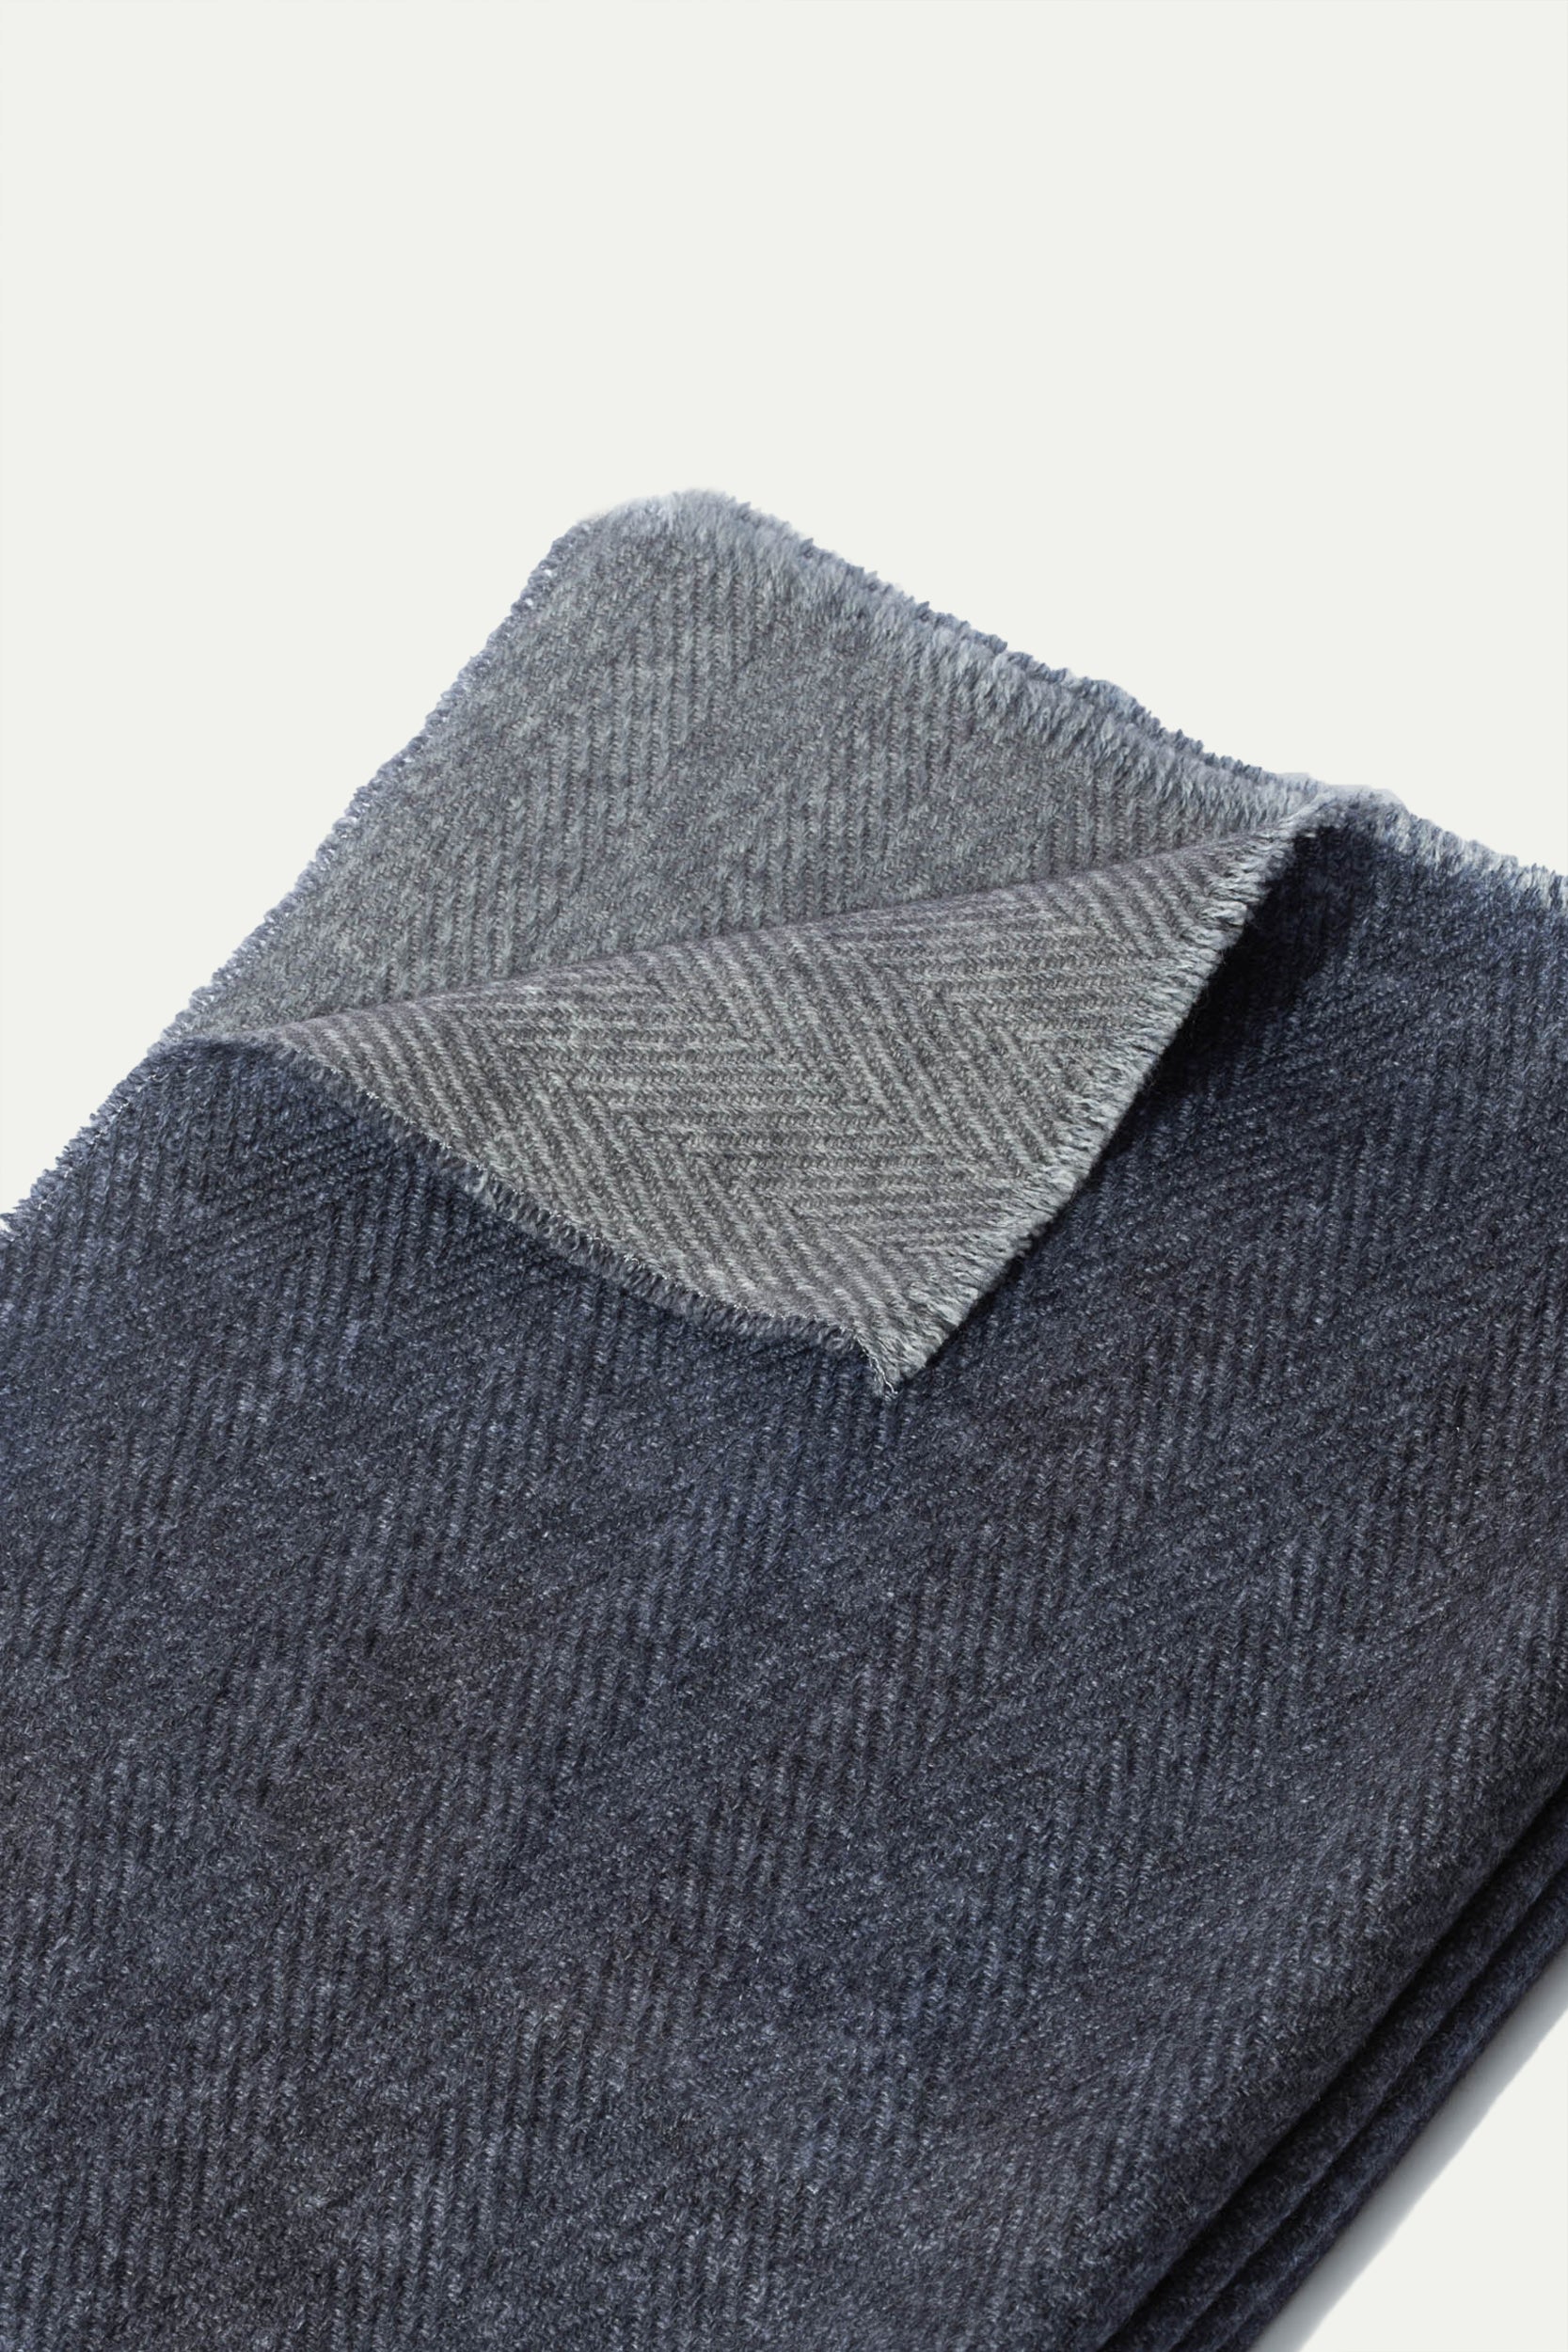 Blue and grey reversible herringbone scarf - Made in Italy